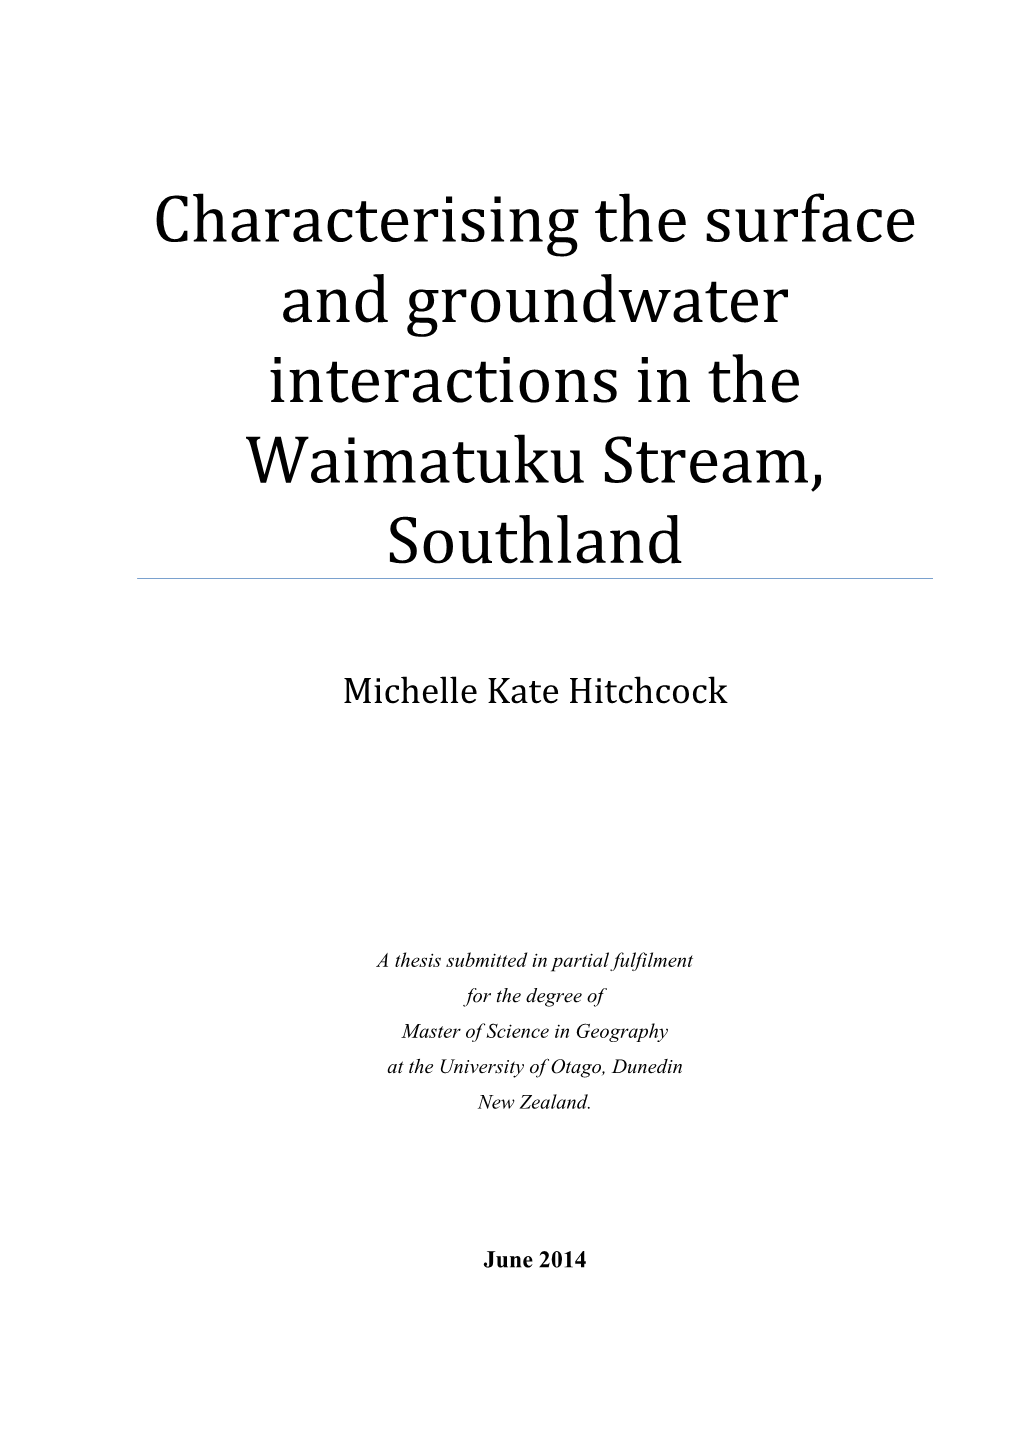 Characterising the Surface and Groundwater Interactions in the Waimatuku Stream, Southland